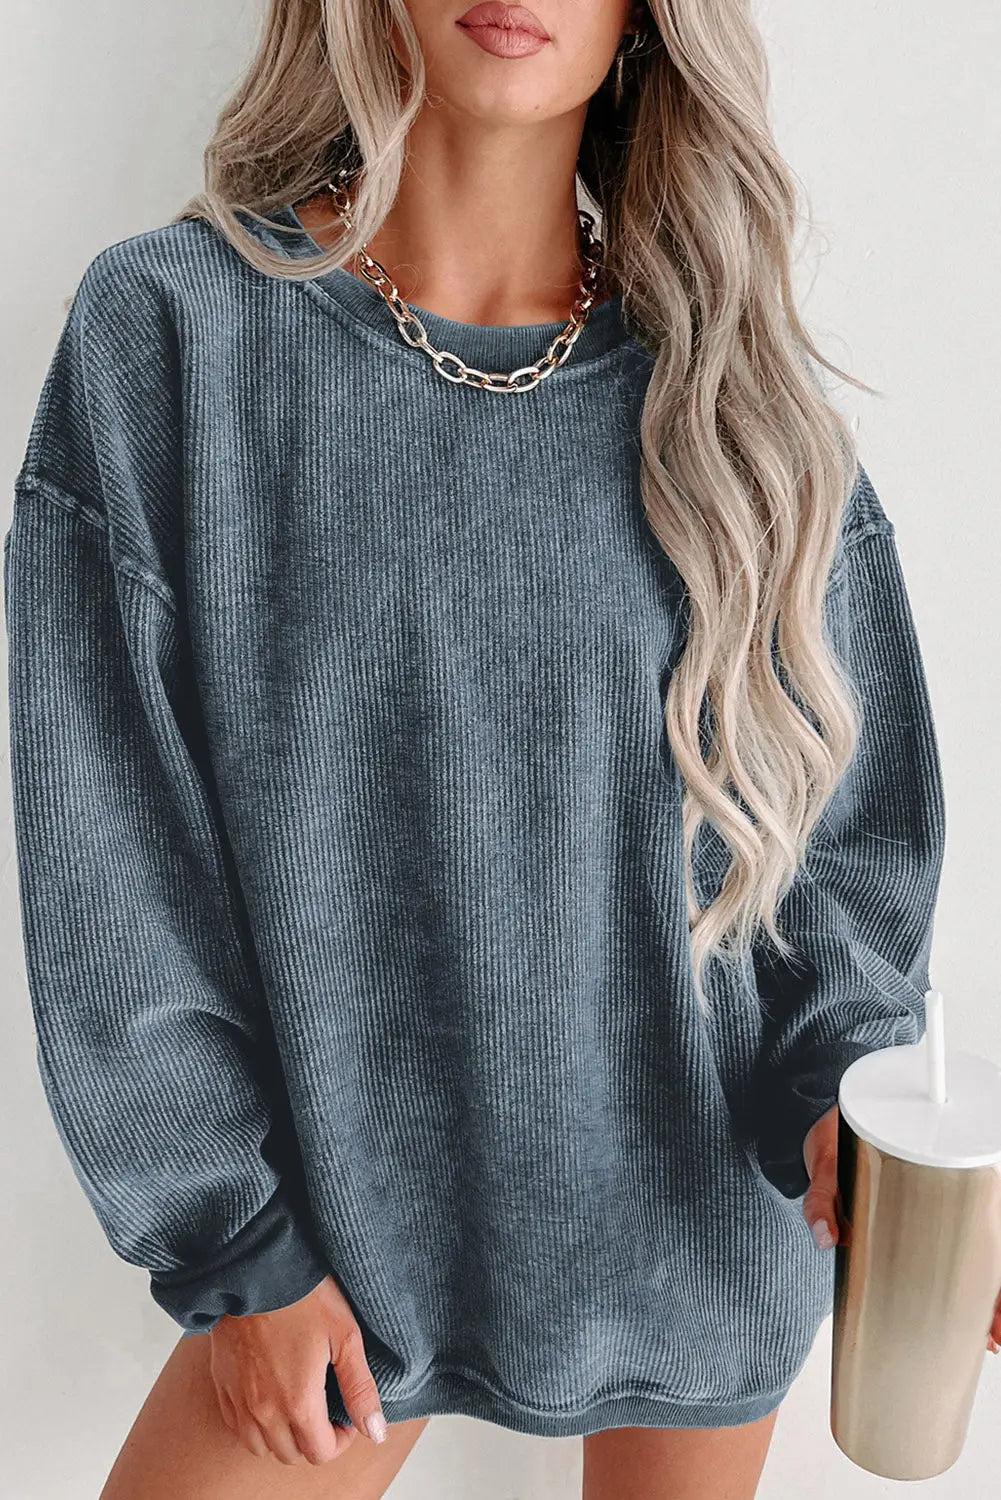 Black solid ribbed knit round neck pullover sweatshirt - blue / s / 100% polyester - tops